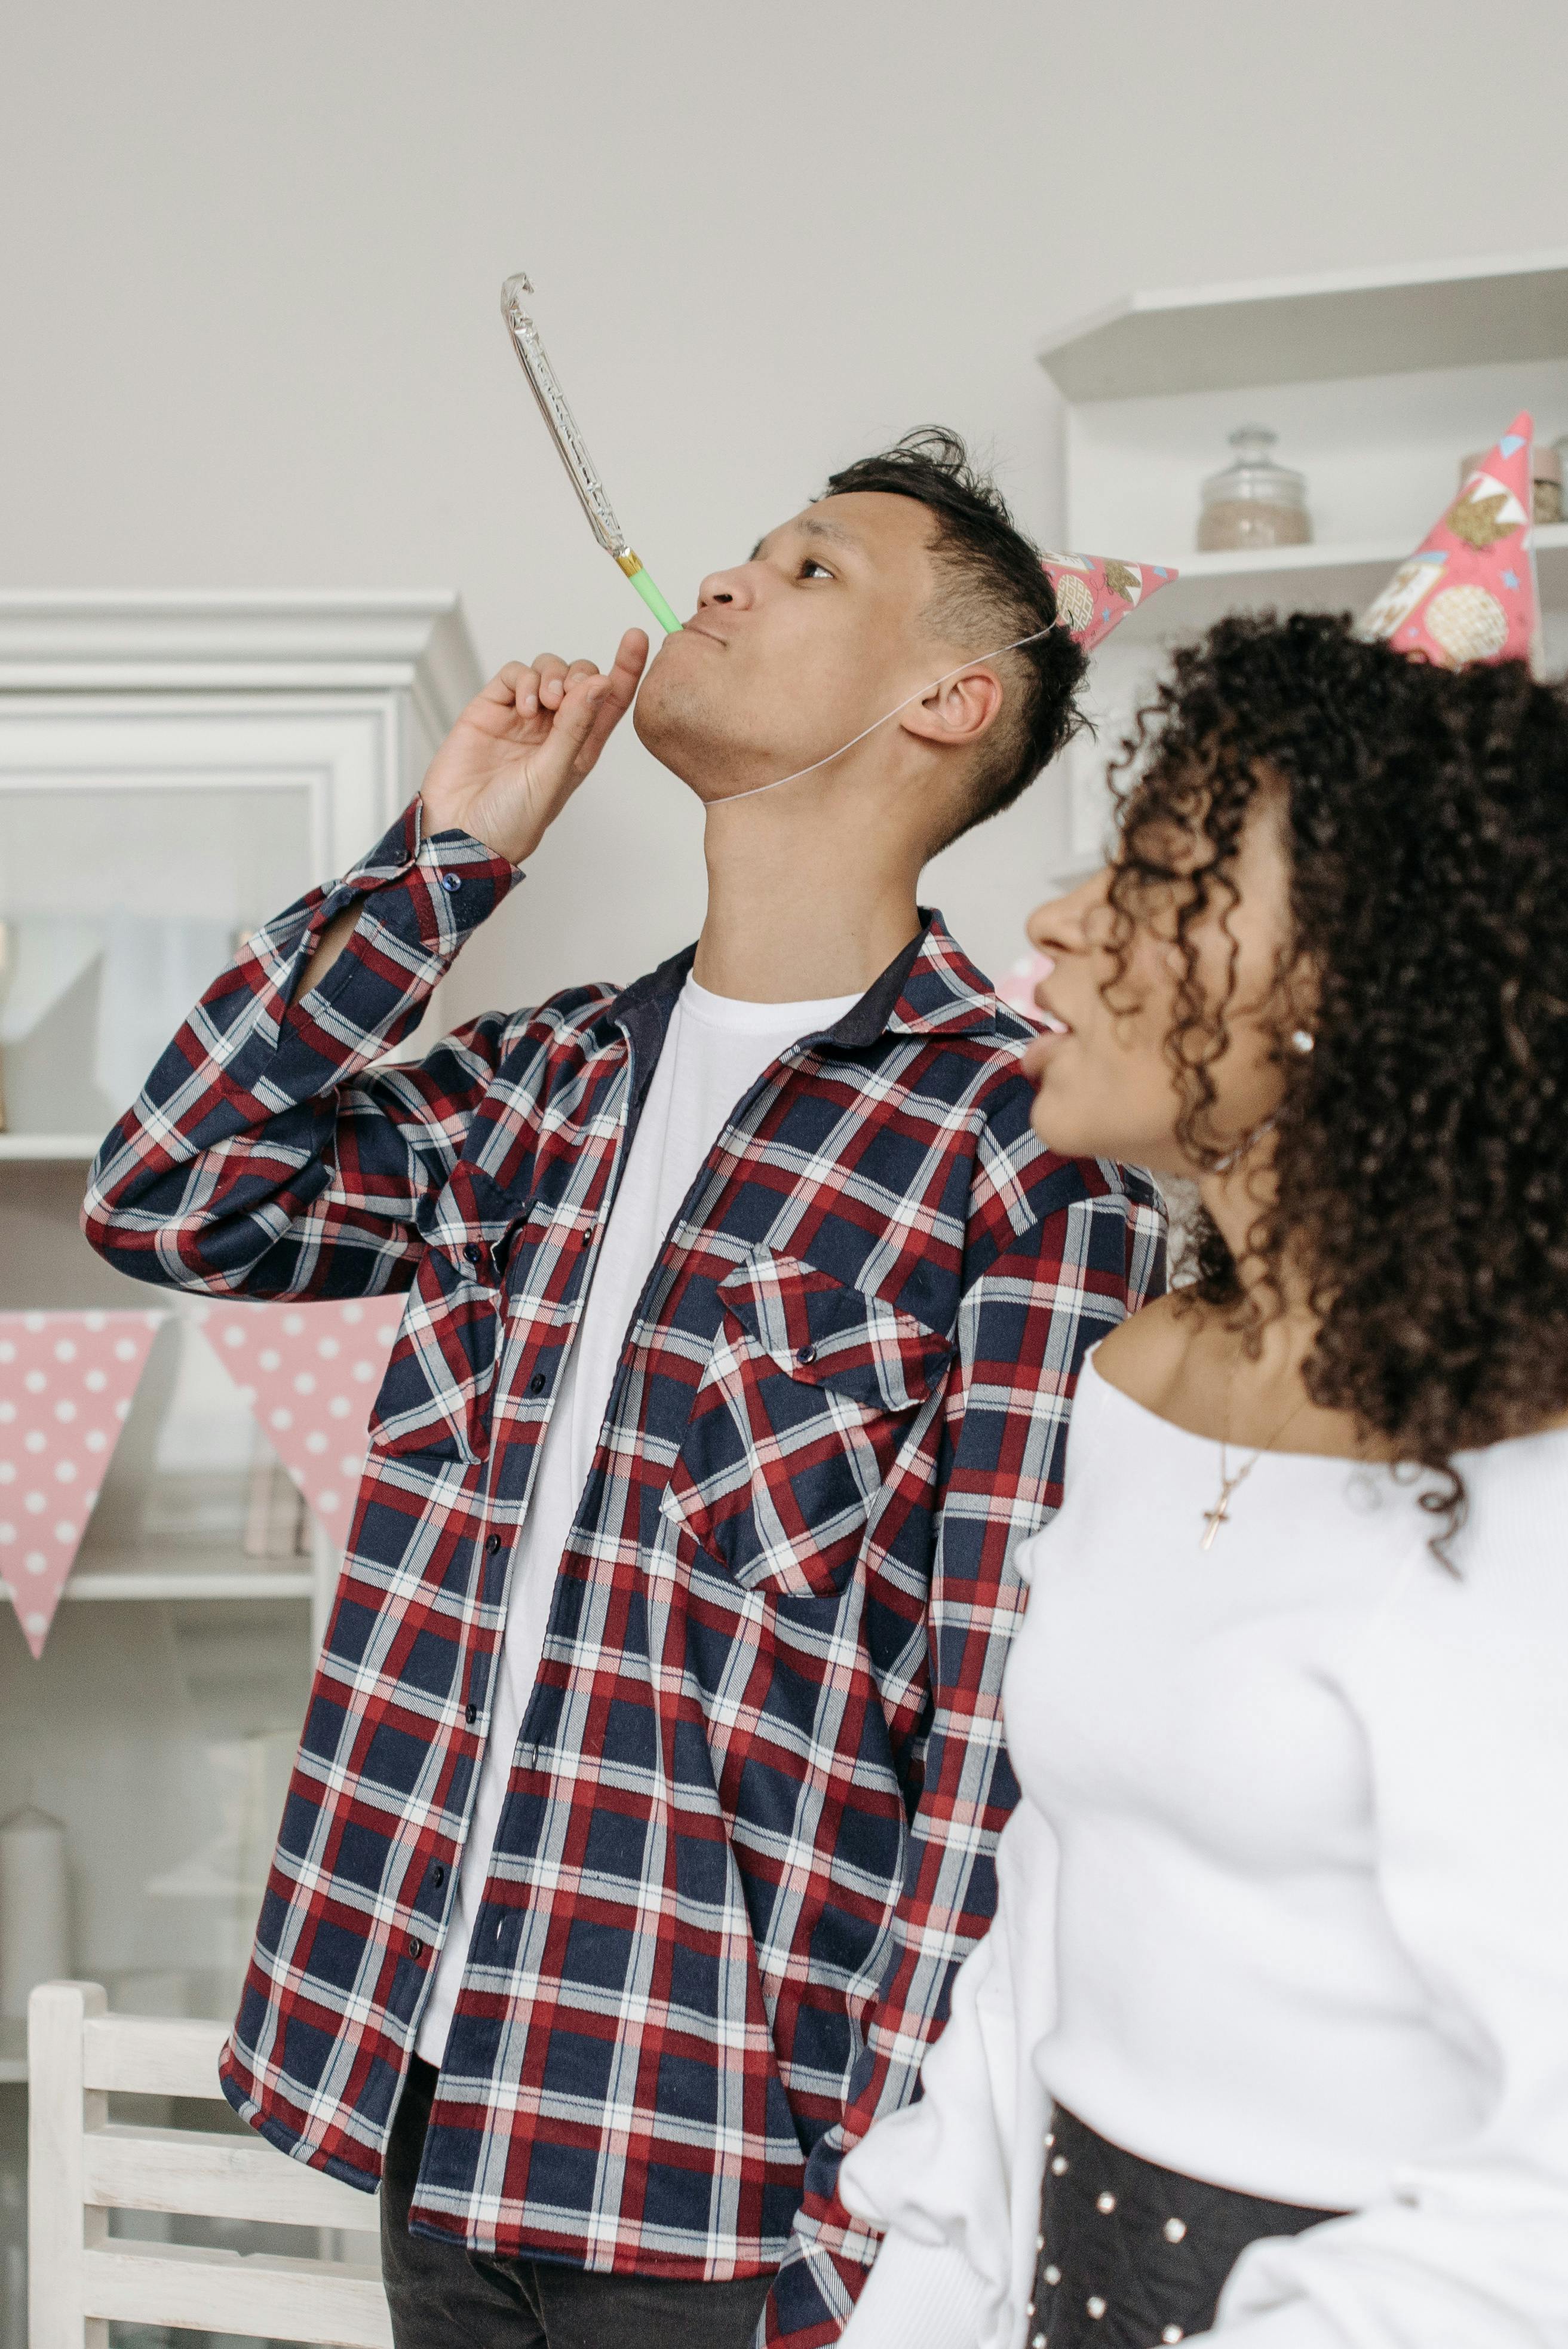 A man blowing a party horn during a birthday party while a woman stands next to him | Source: Pexels